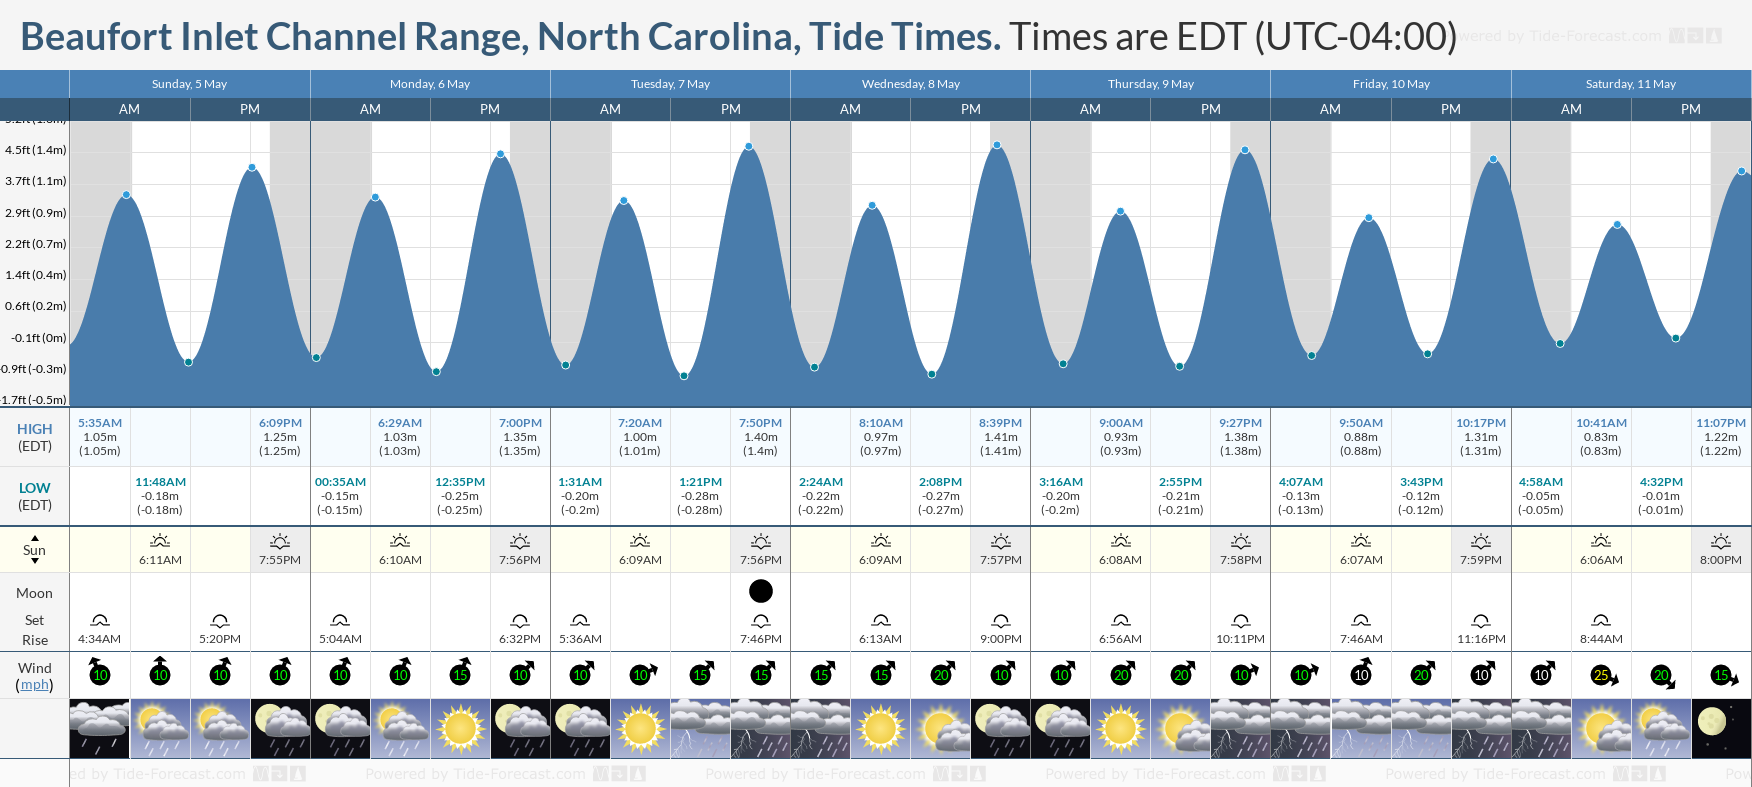 Beaufort Inlet Channel Range, North Carolina Tide Chart including high and low tide tide times for the next 7 days